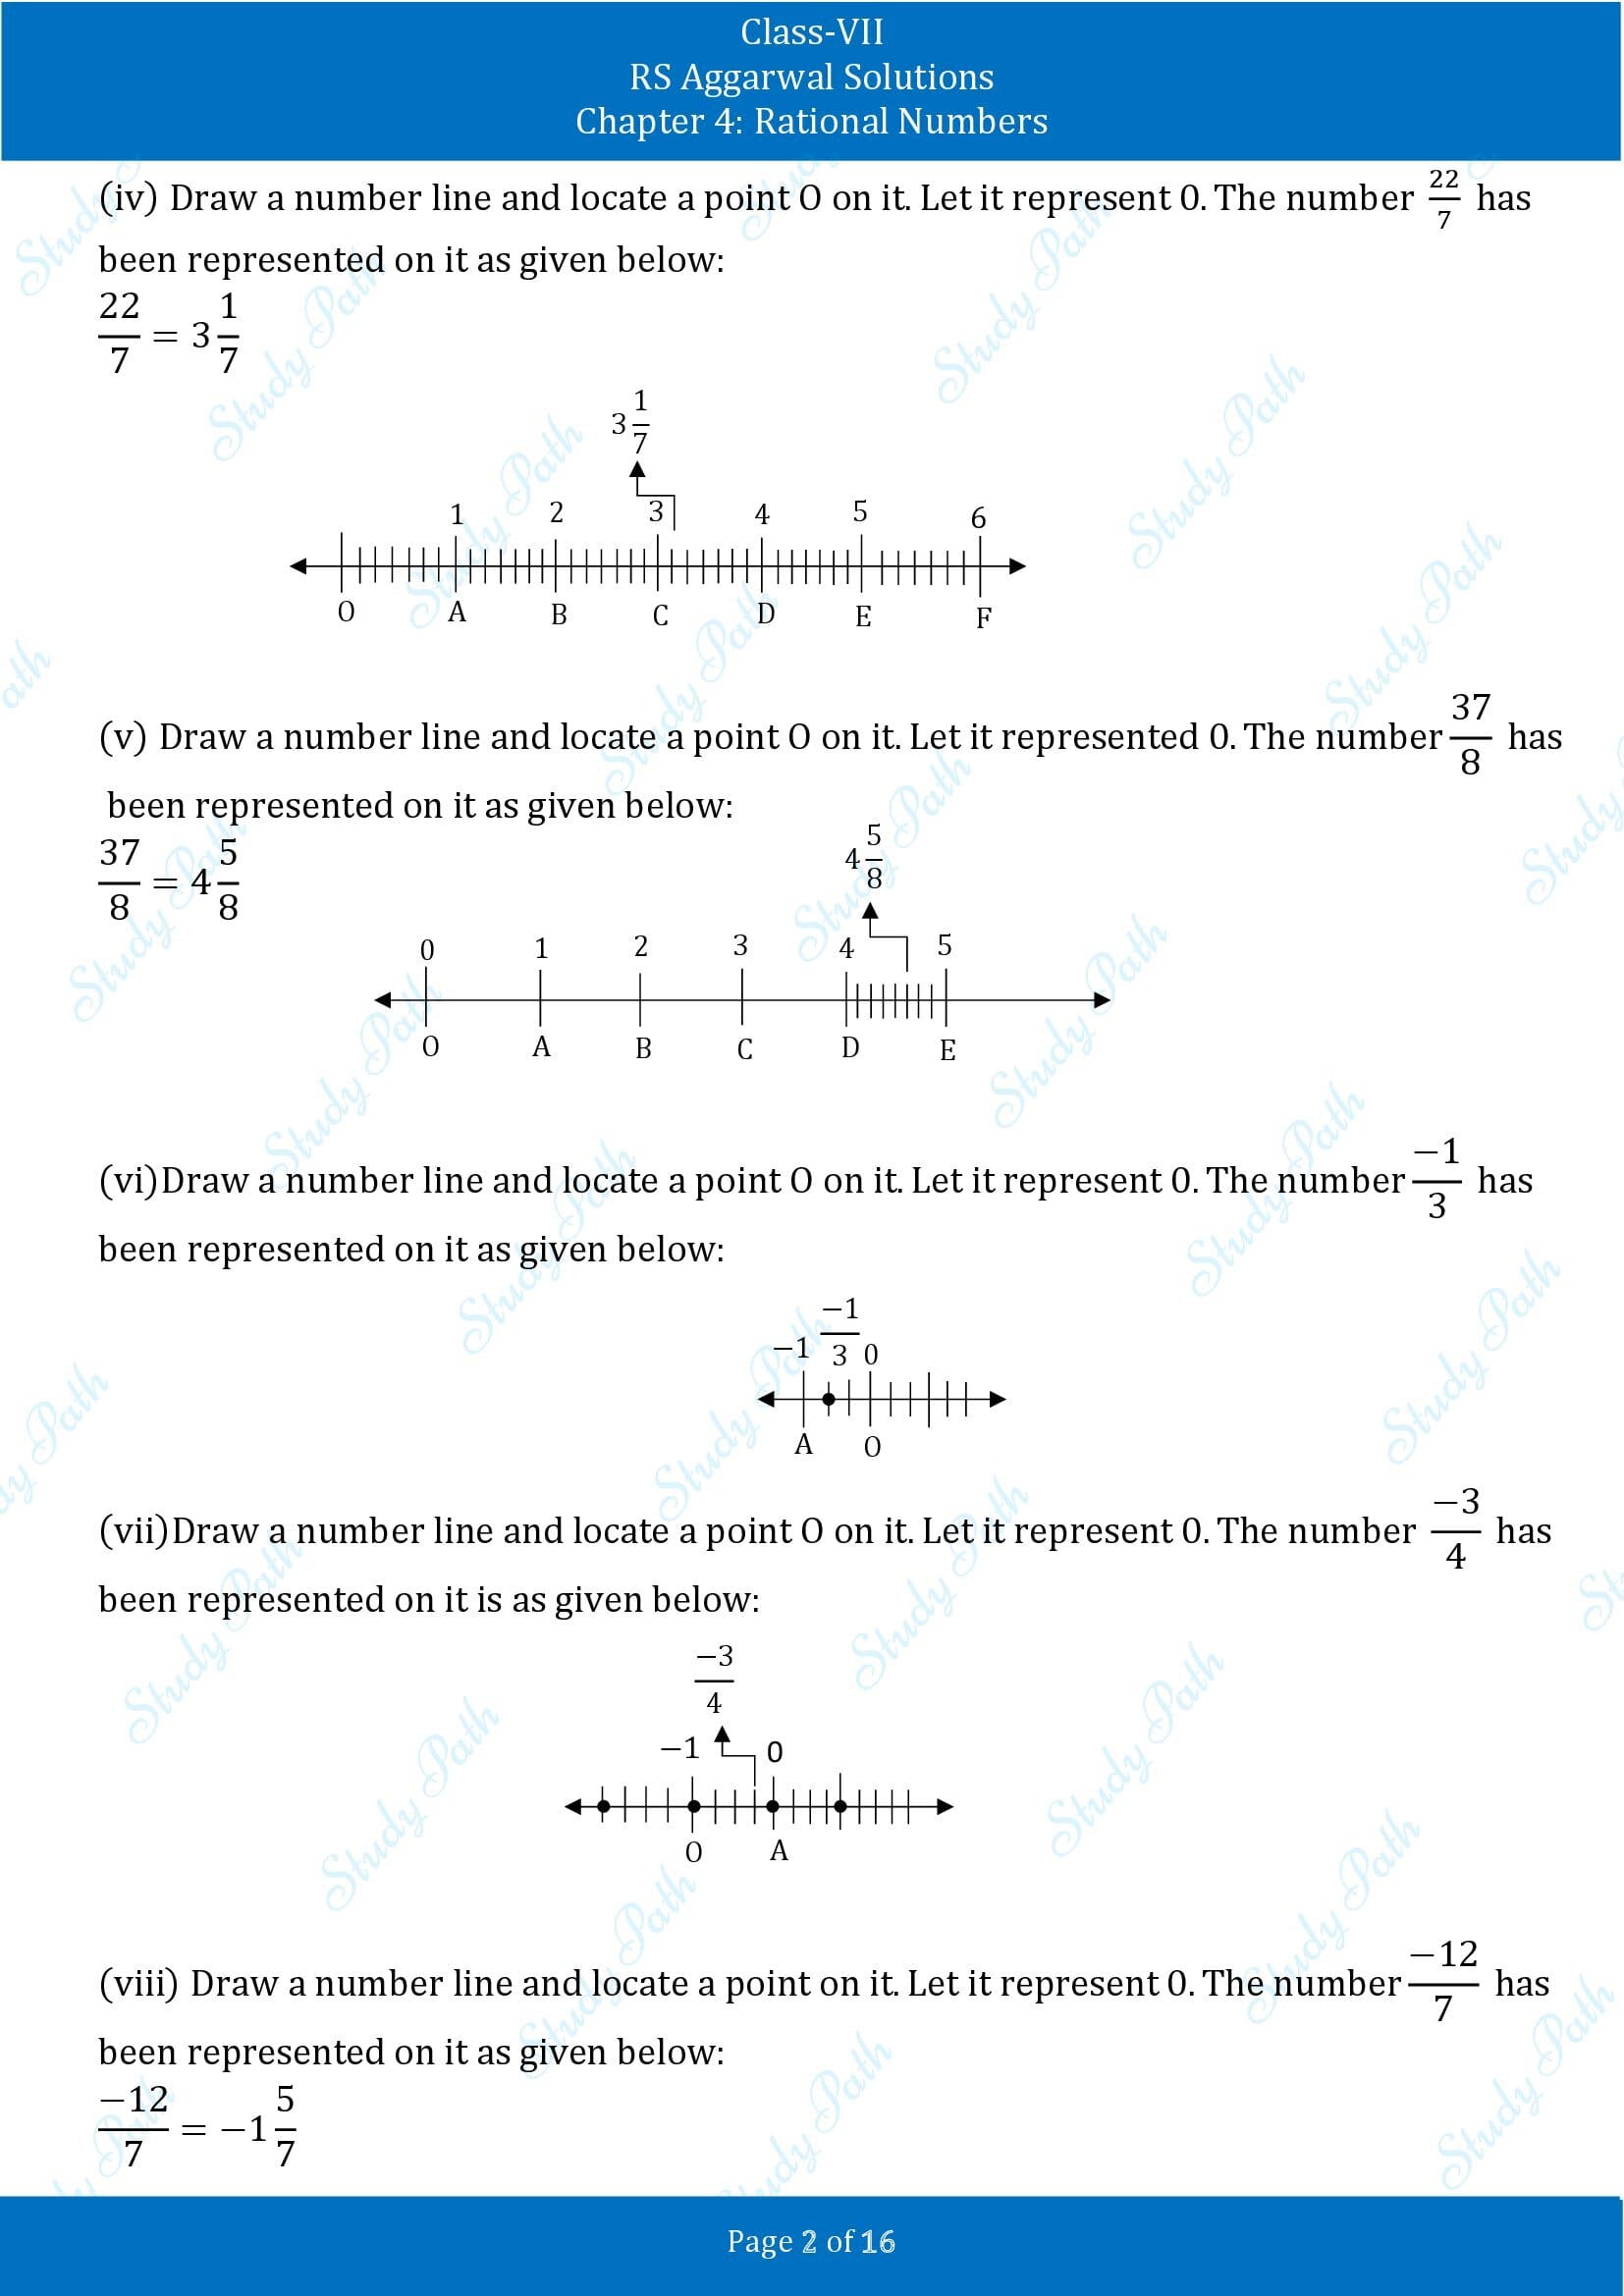 RS Aggarwal Solutions Class 7 Chapter 4 Rational Numbers Exercise 4B 00002